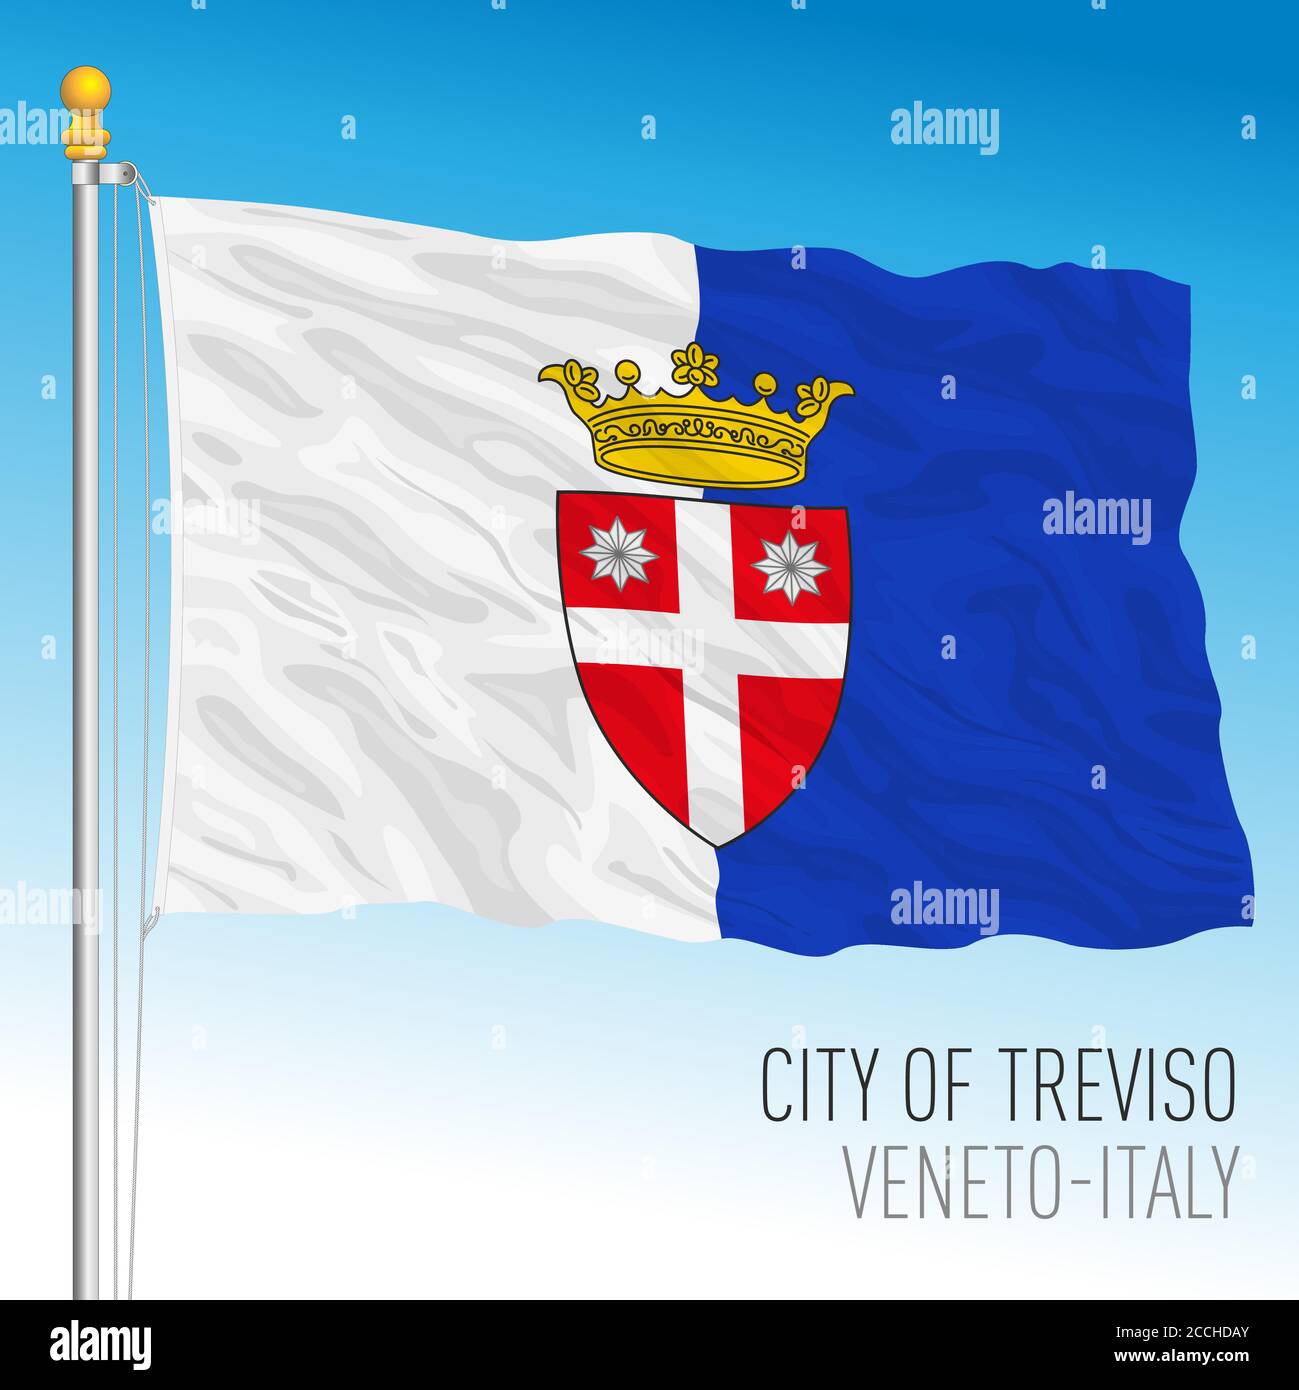 Treviso, official flag of the city and municipality, Veneto, Italy, vector illustration Stock Vector